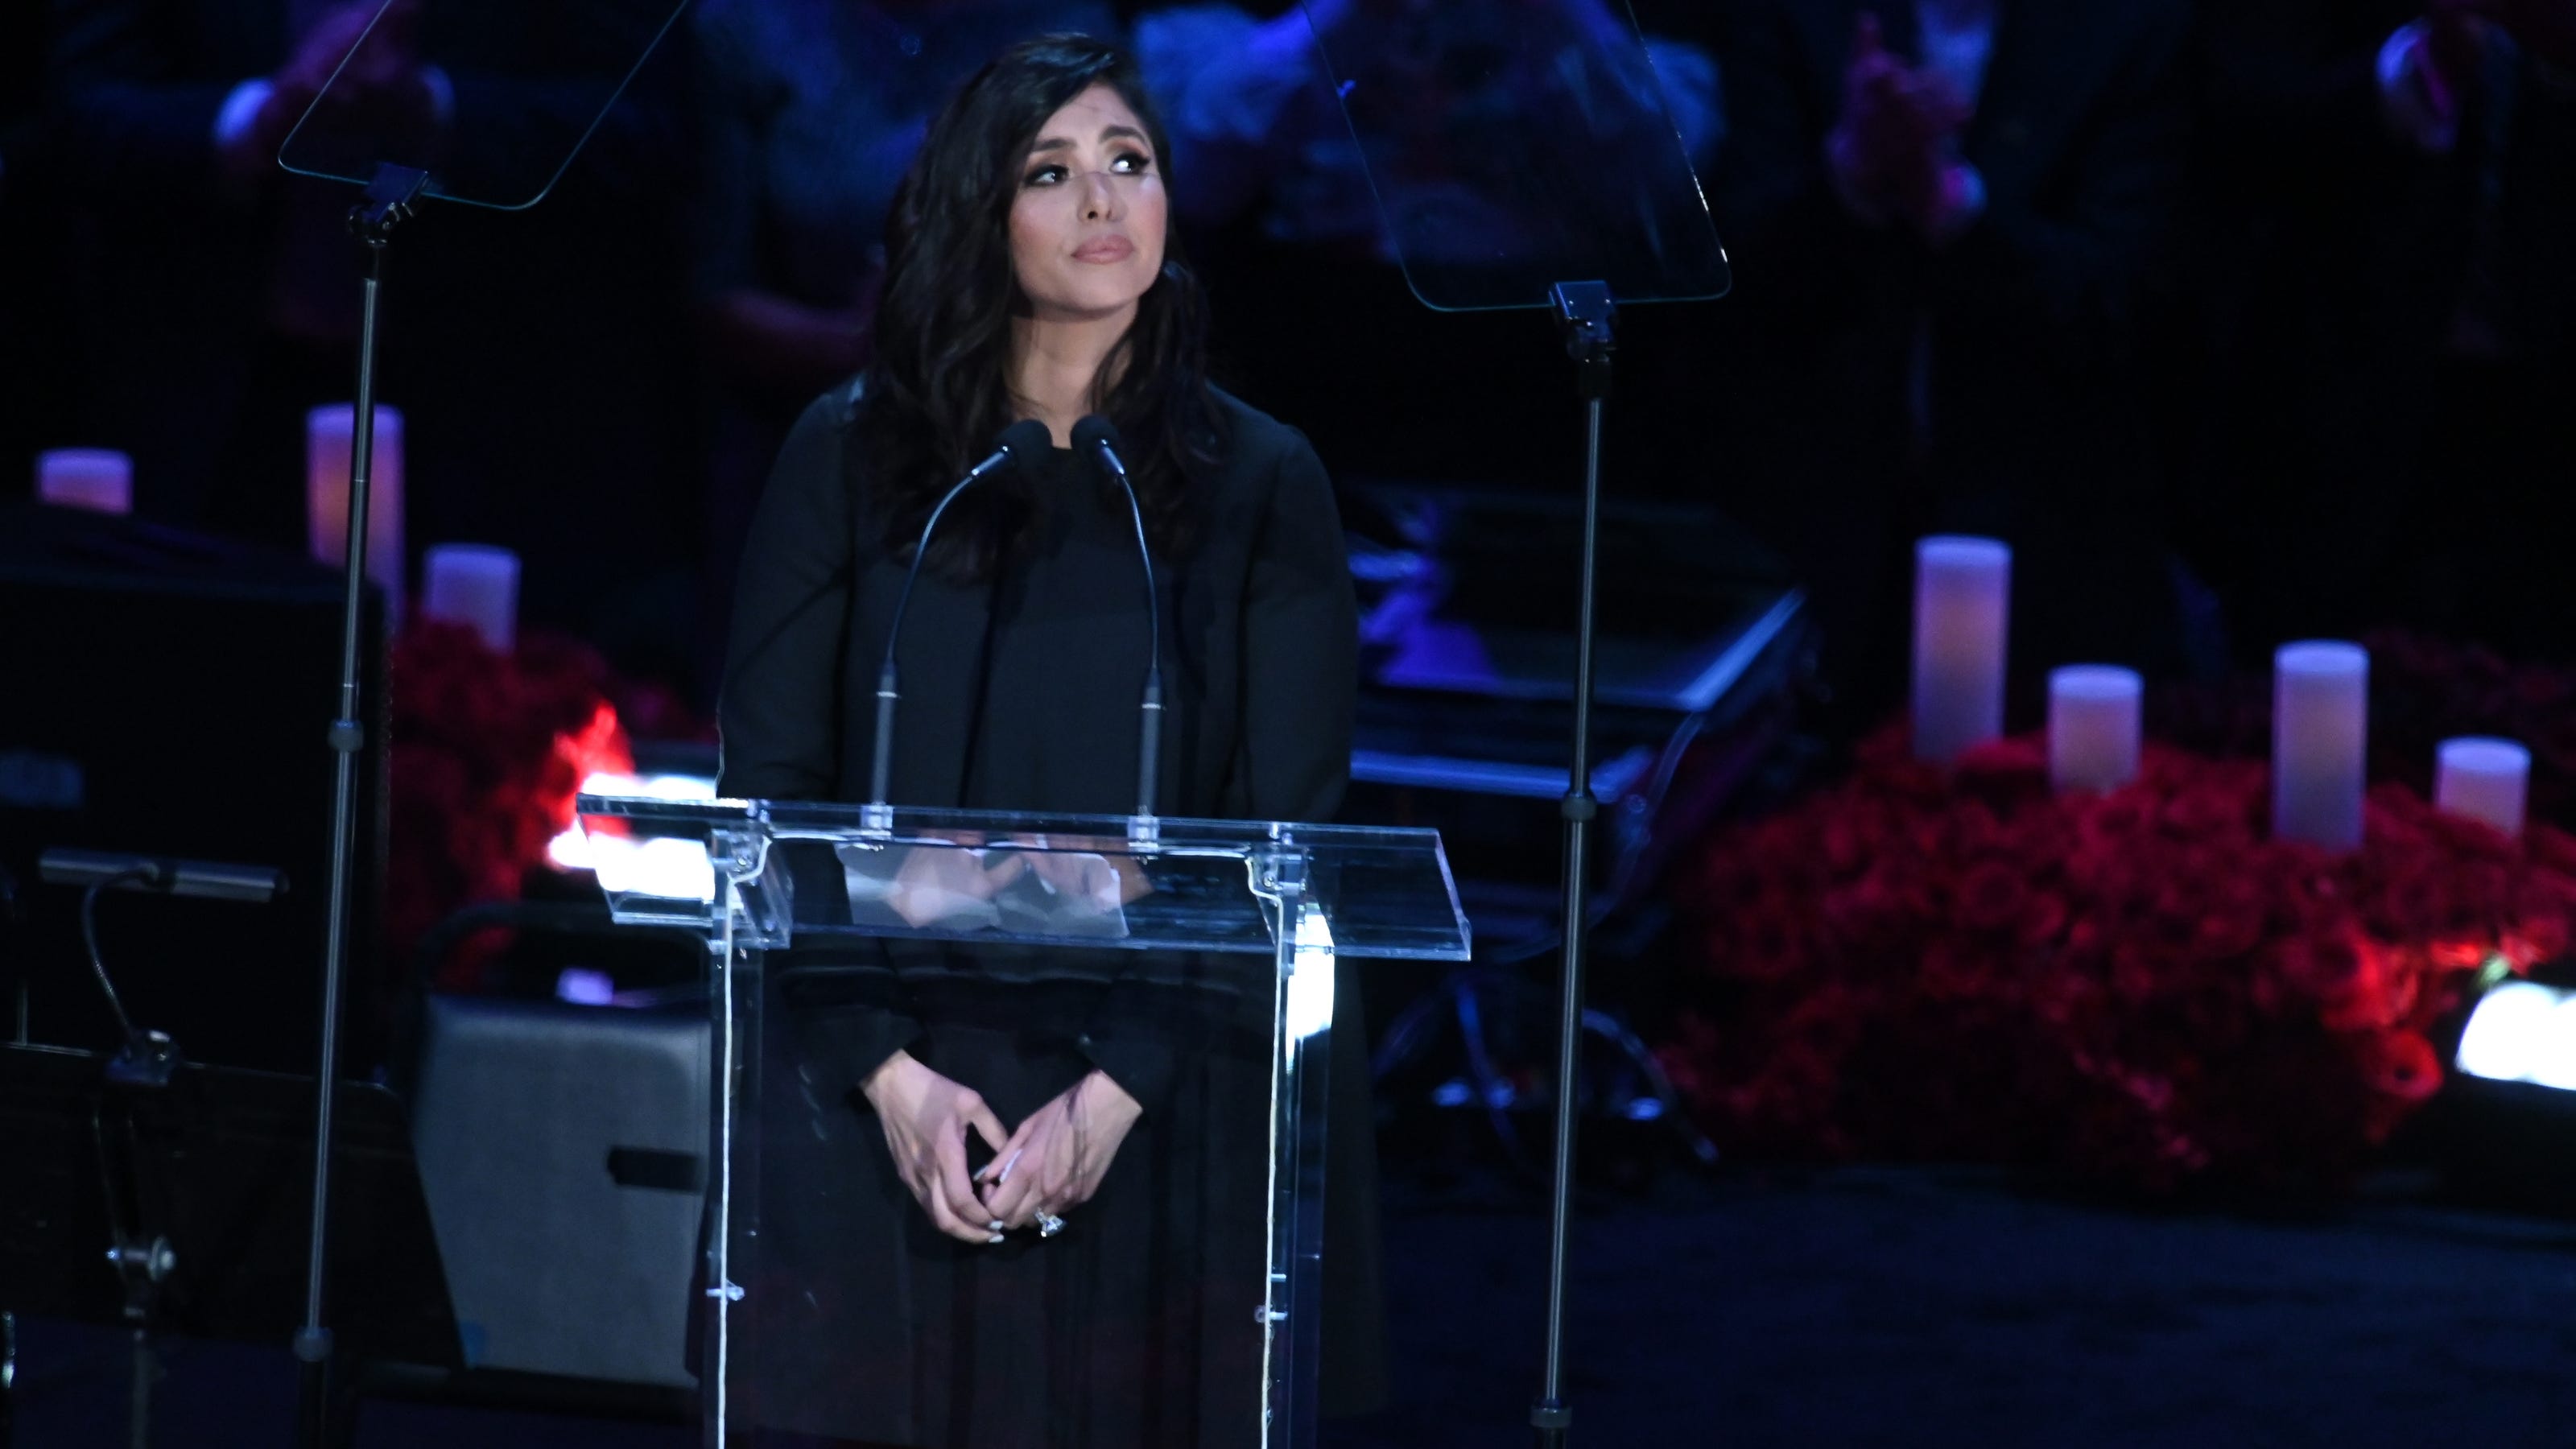 Intensely private Vanessa Bryant shares emotional stories at Kobe memorial.